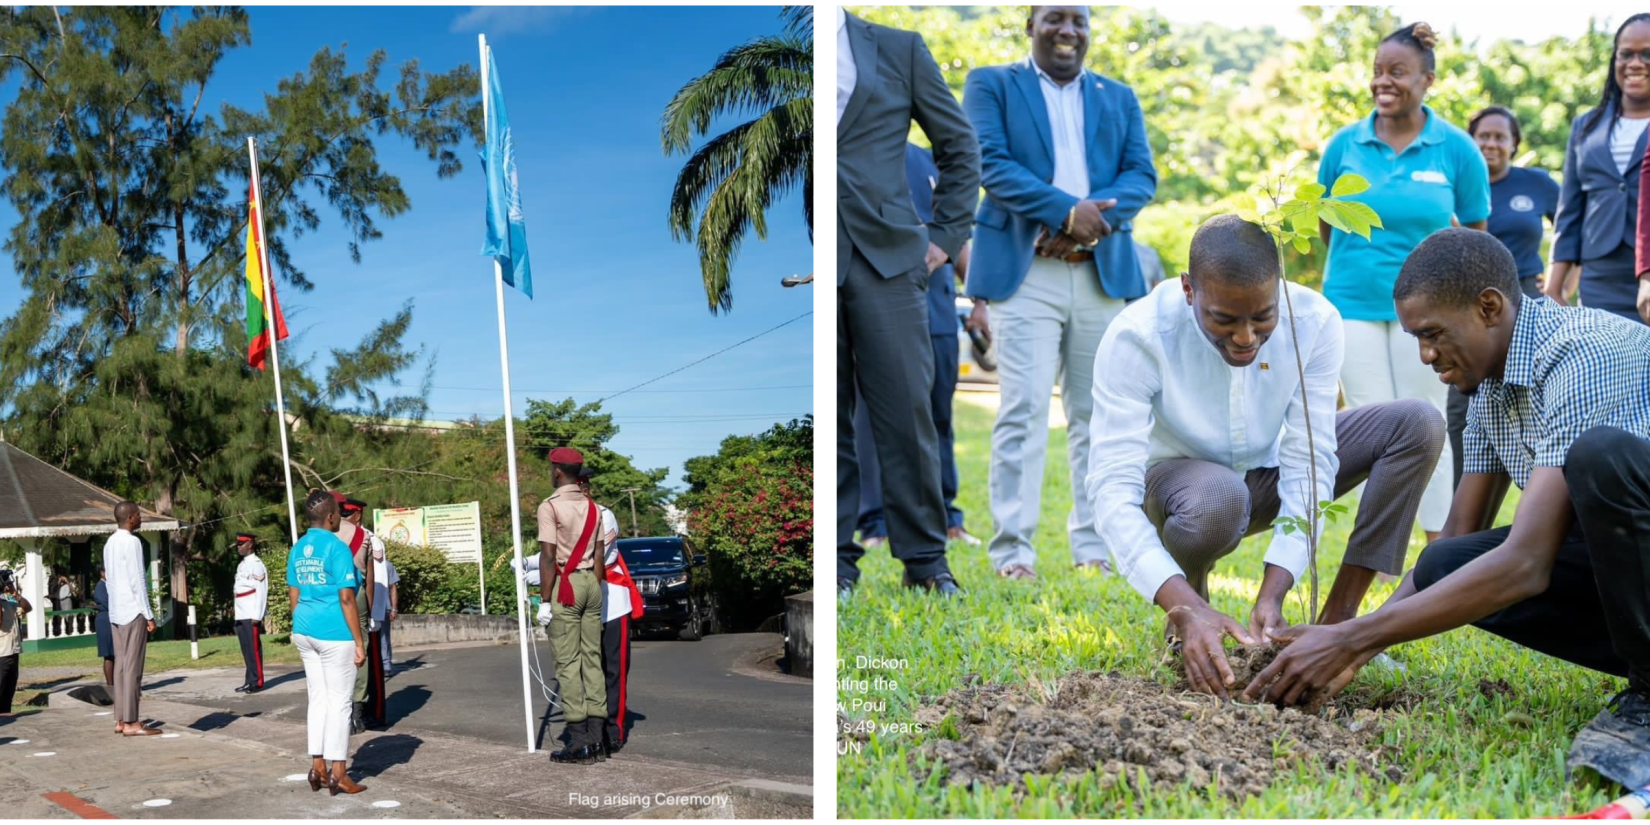 The flag of the United Nations is raised and the Prime Minister of Grenada Dickon Mitchell helps to plant a Poui Tree